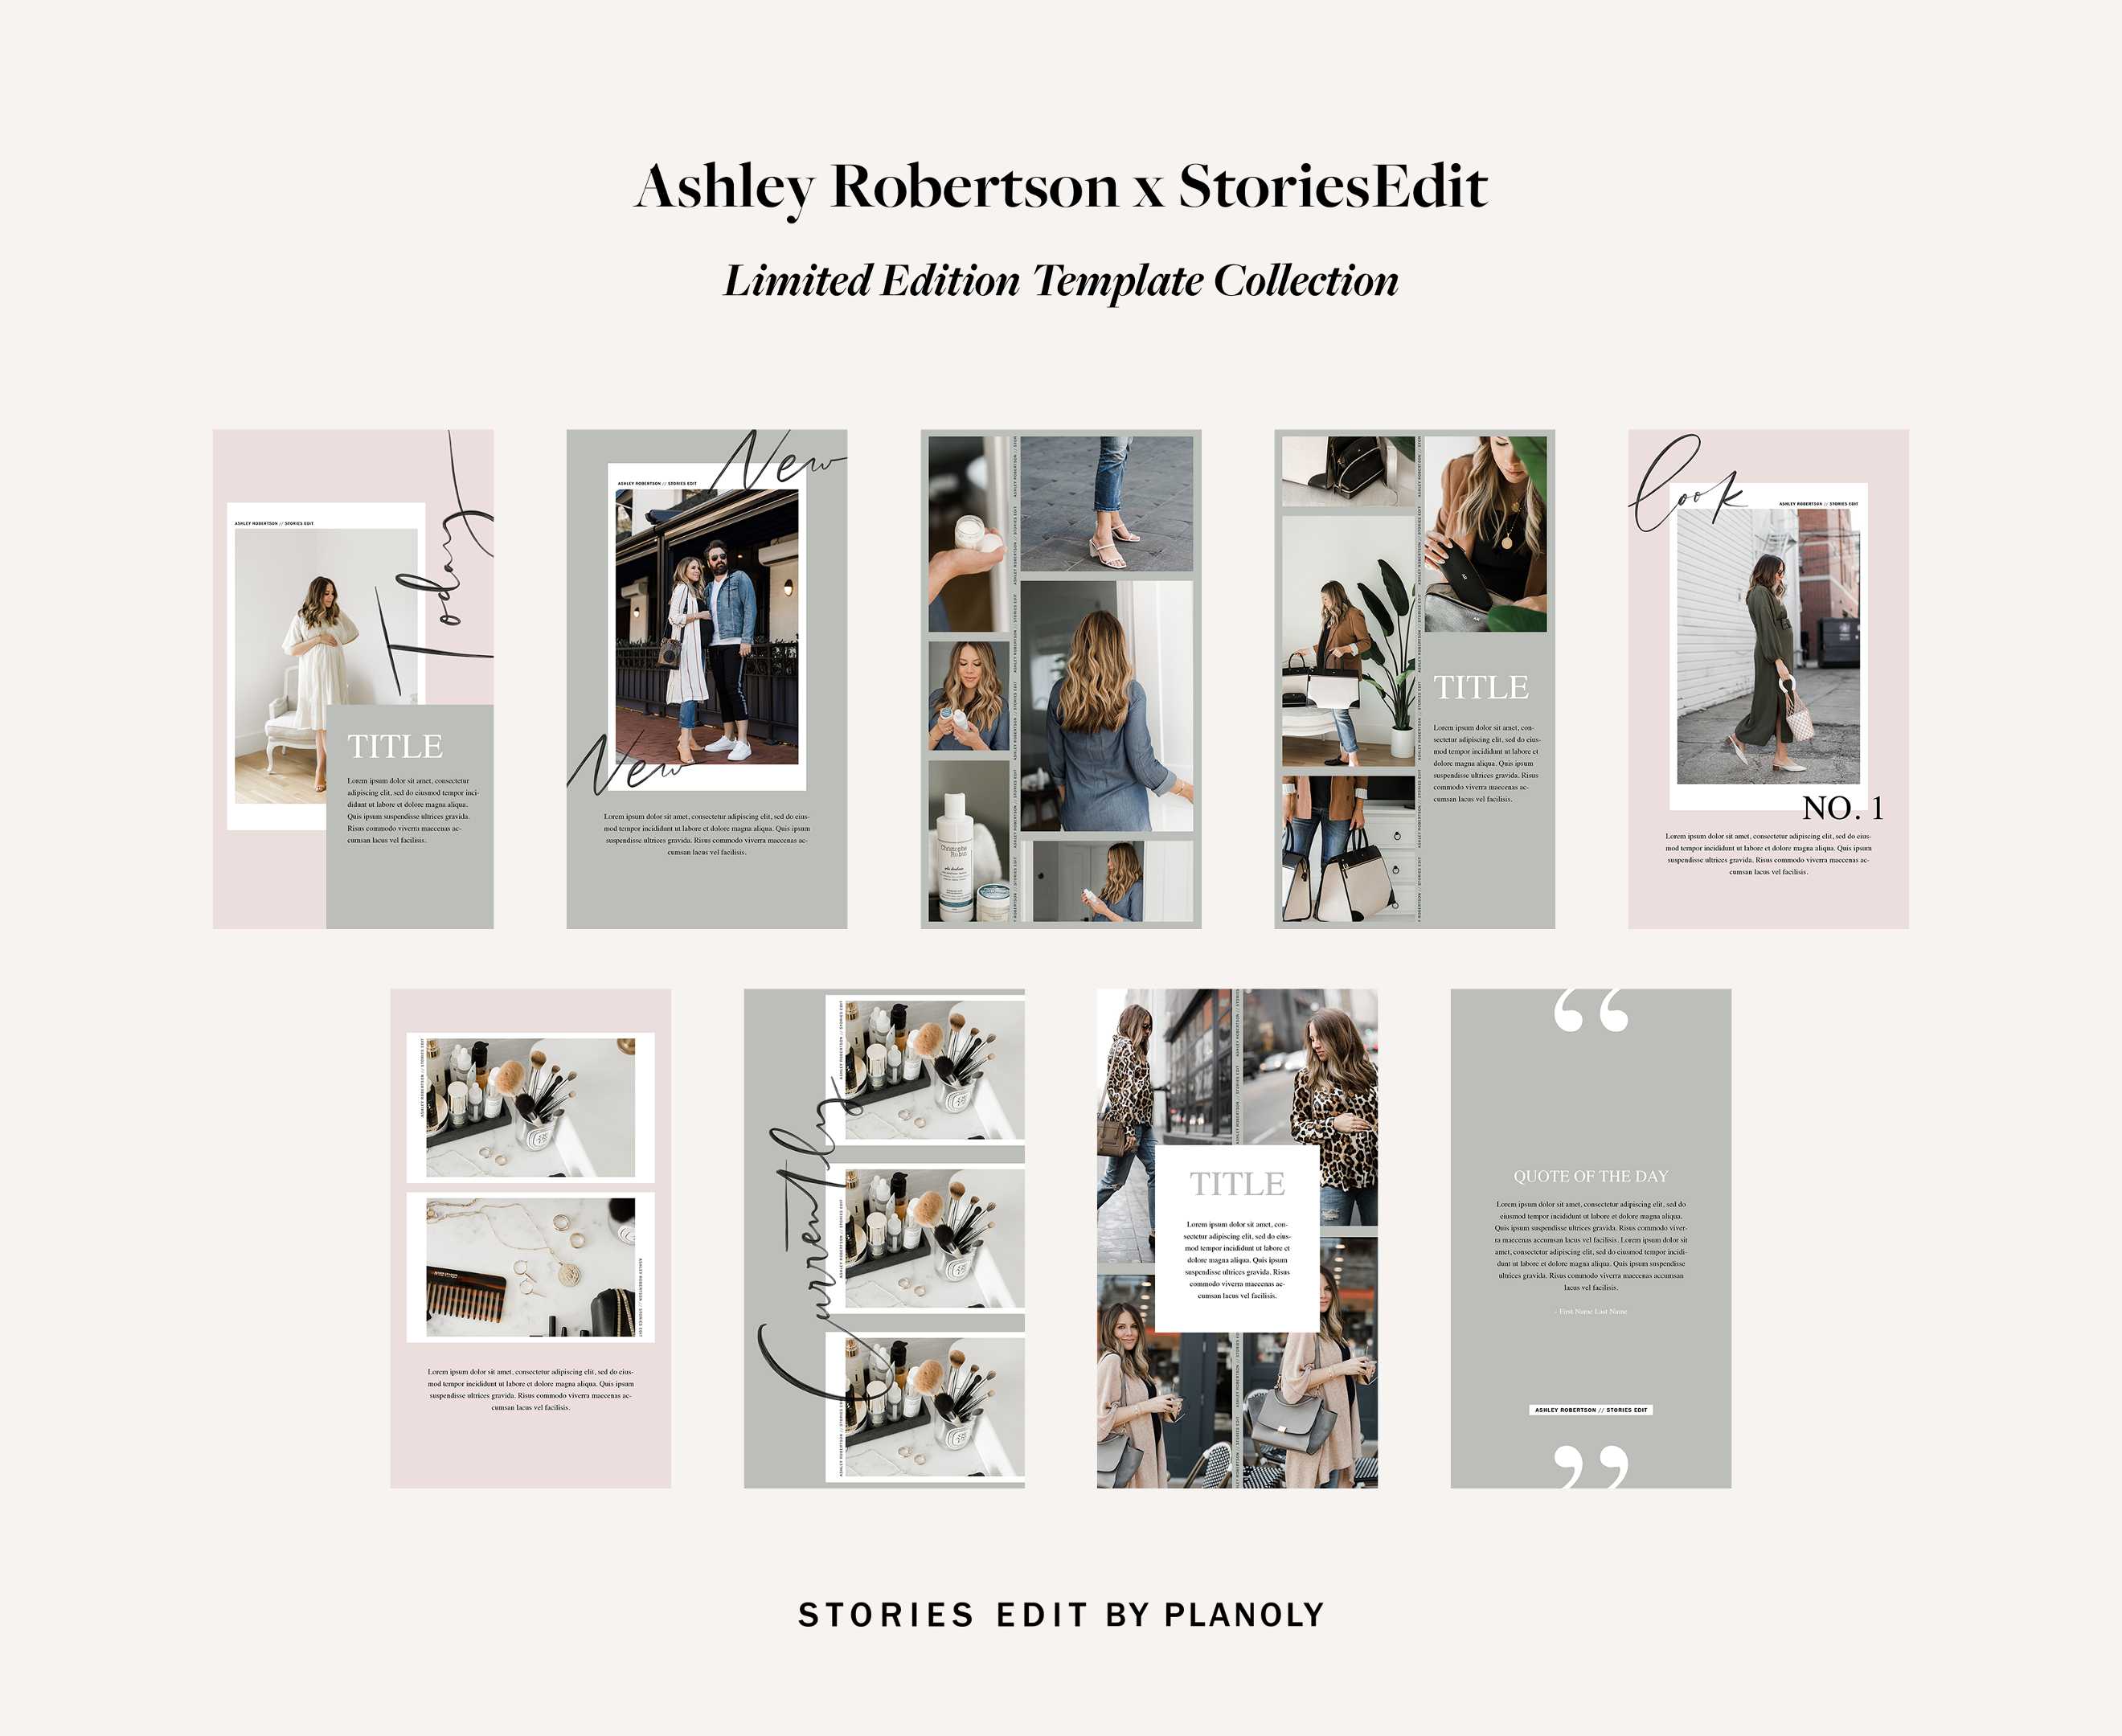 Ashley Robertson x StoriesEdit Template Collection